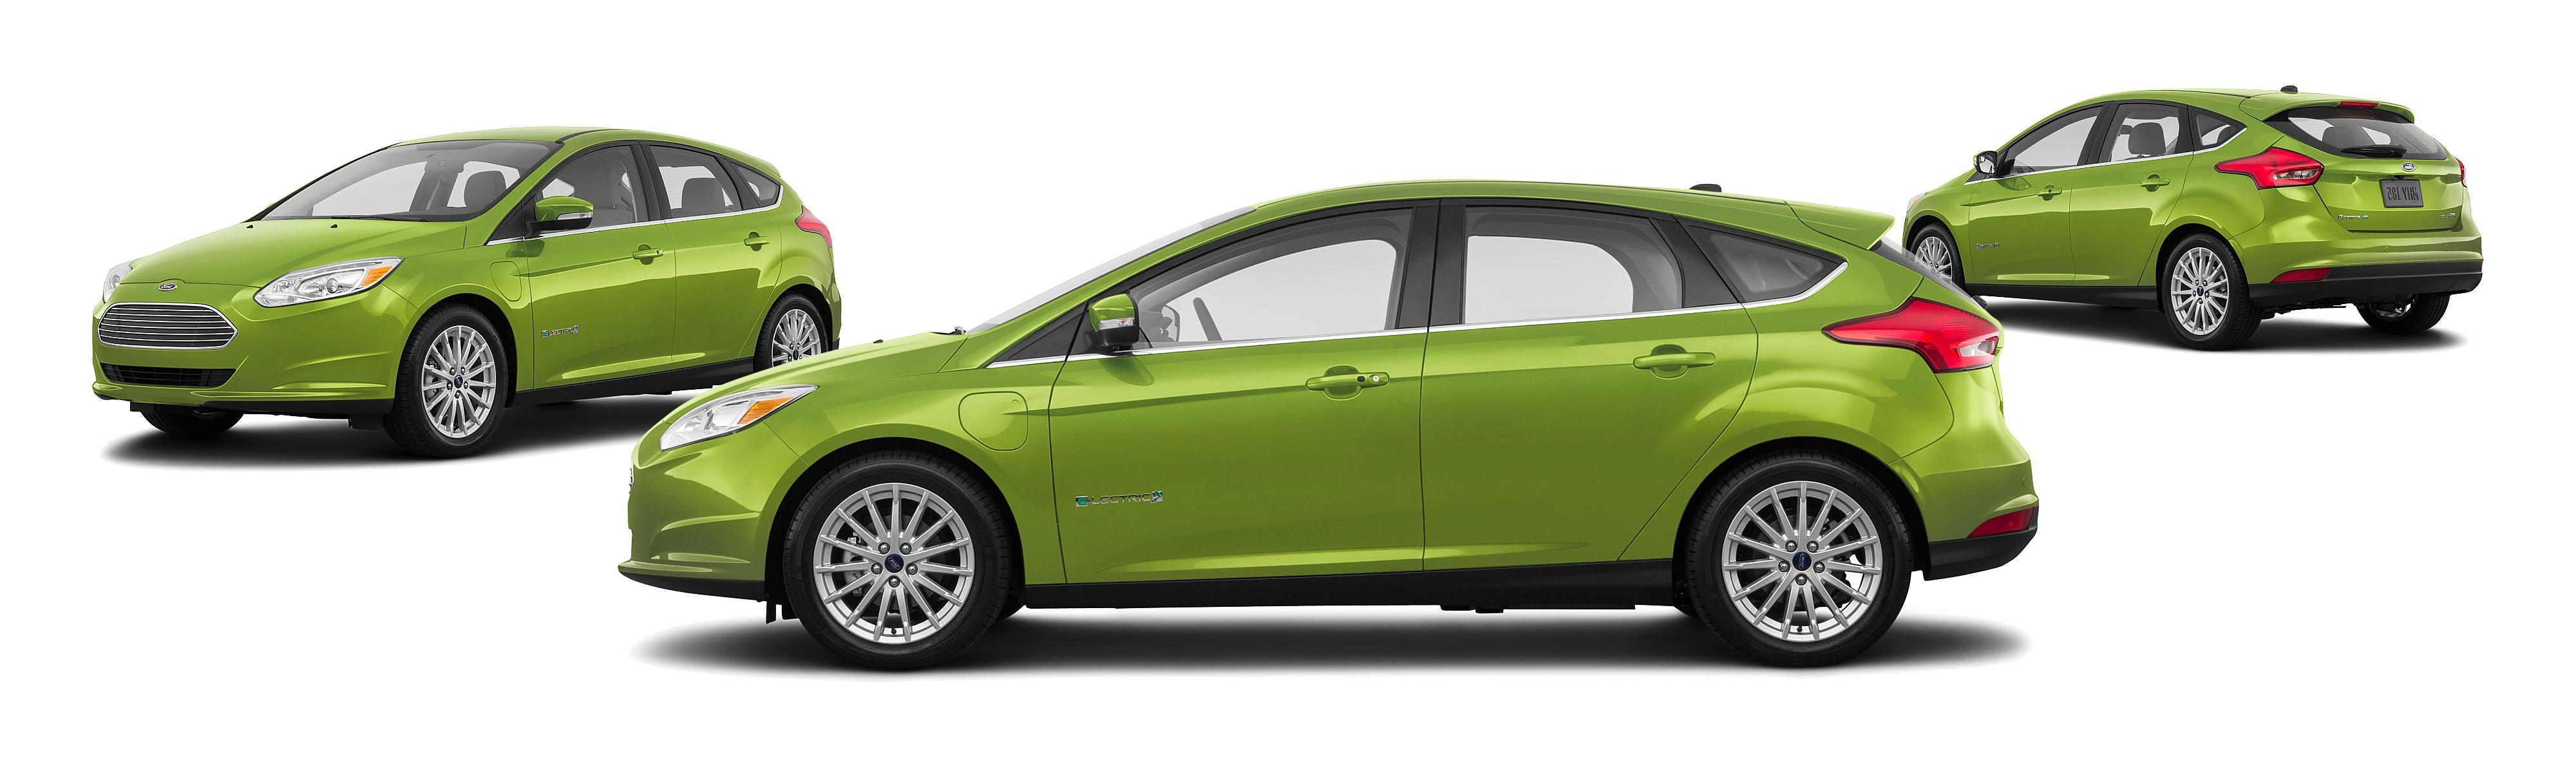 2018 Ford Focus Electric 4dr Hatchback - Research - GrooveCar